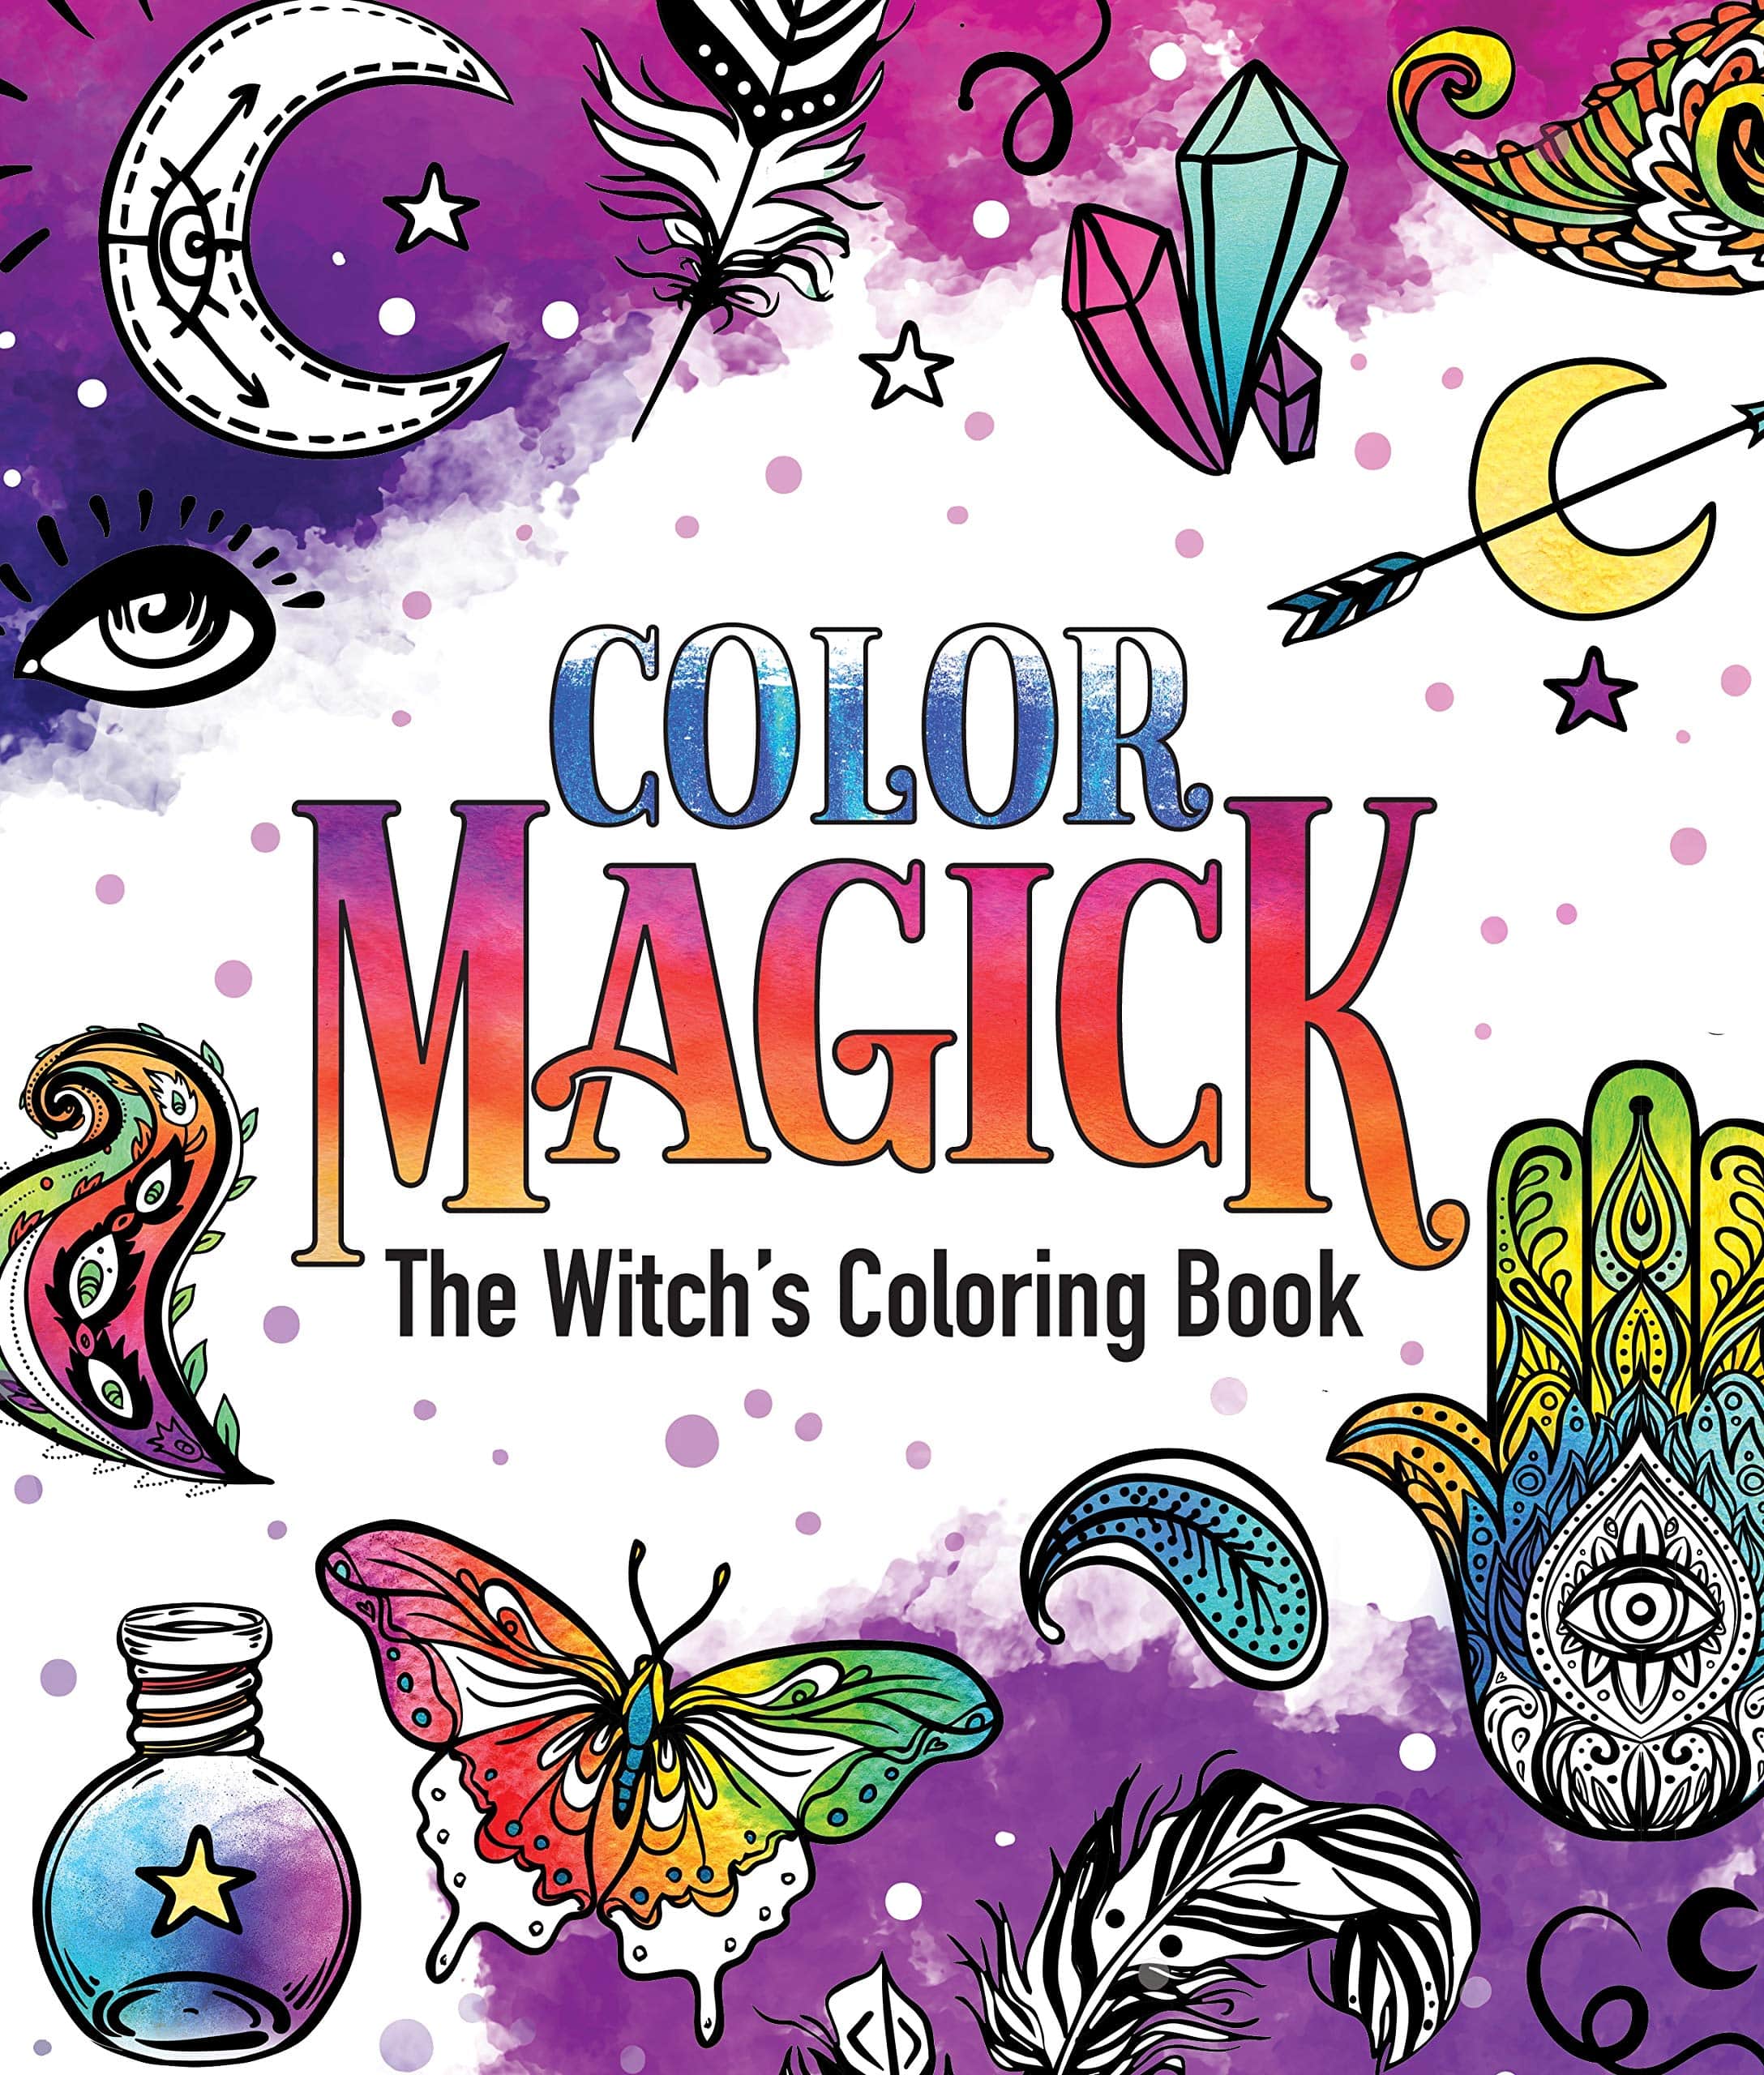 The Lair Color Magick: The Witch's Coloring Book